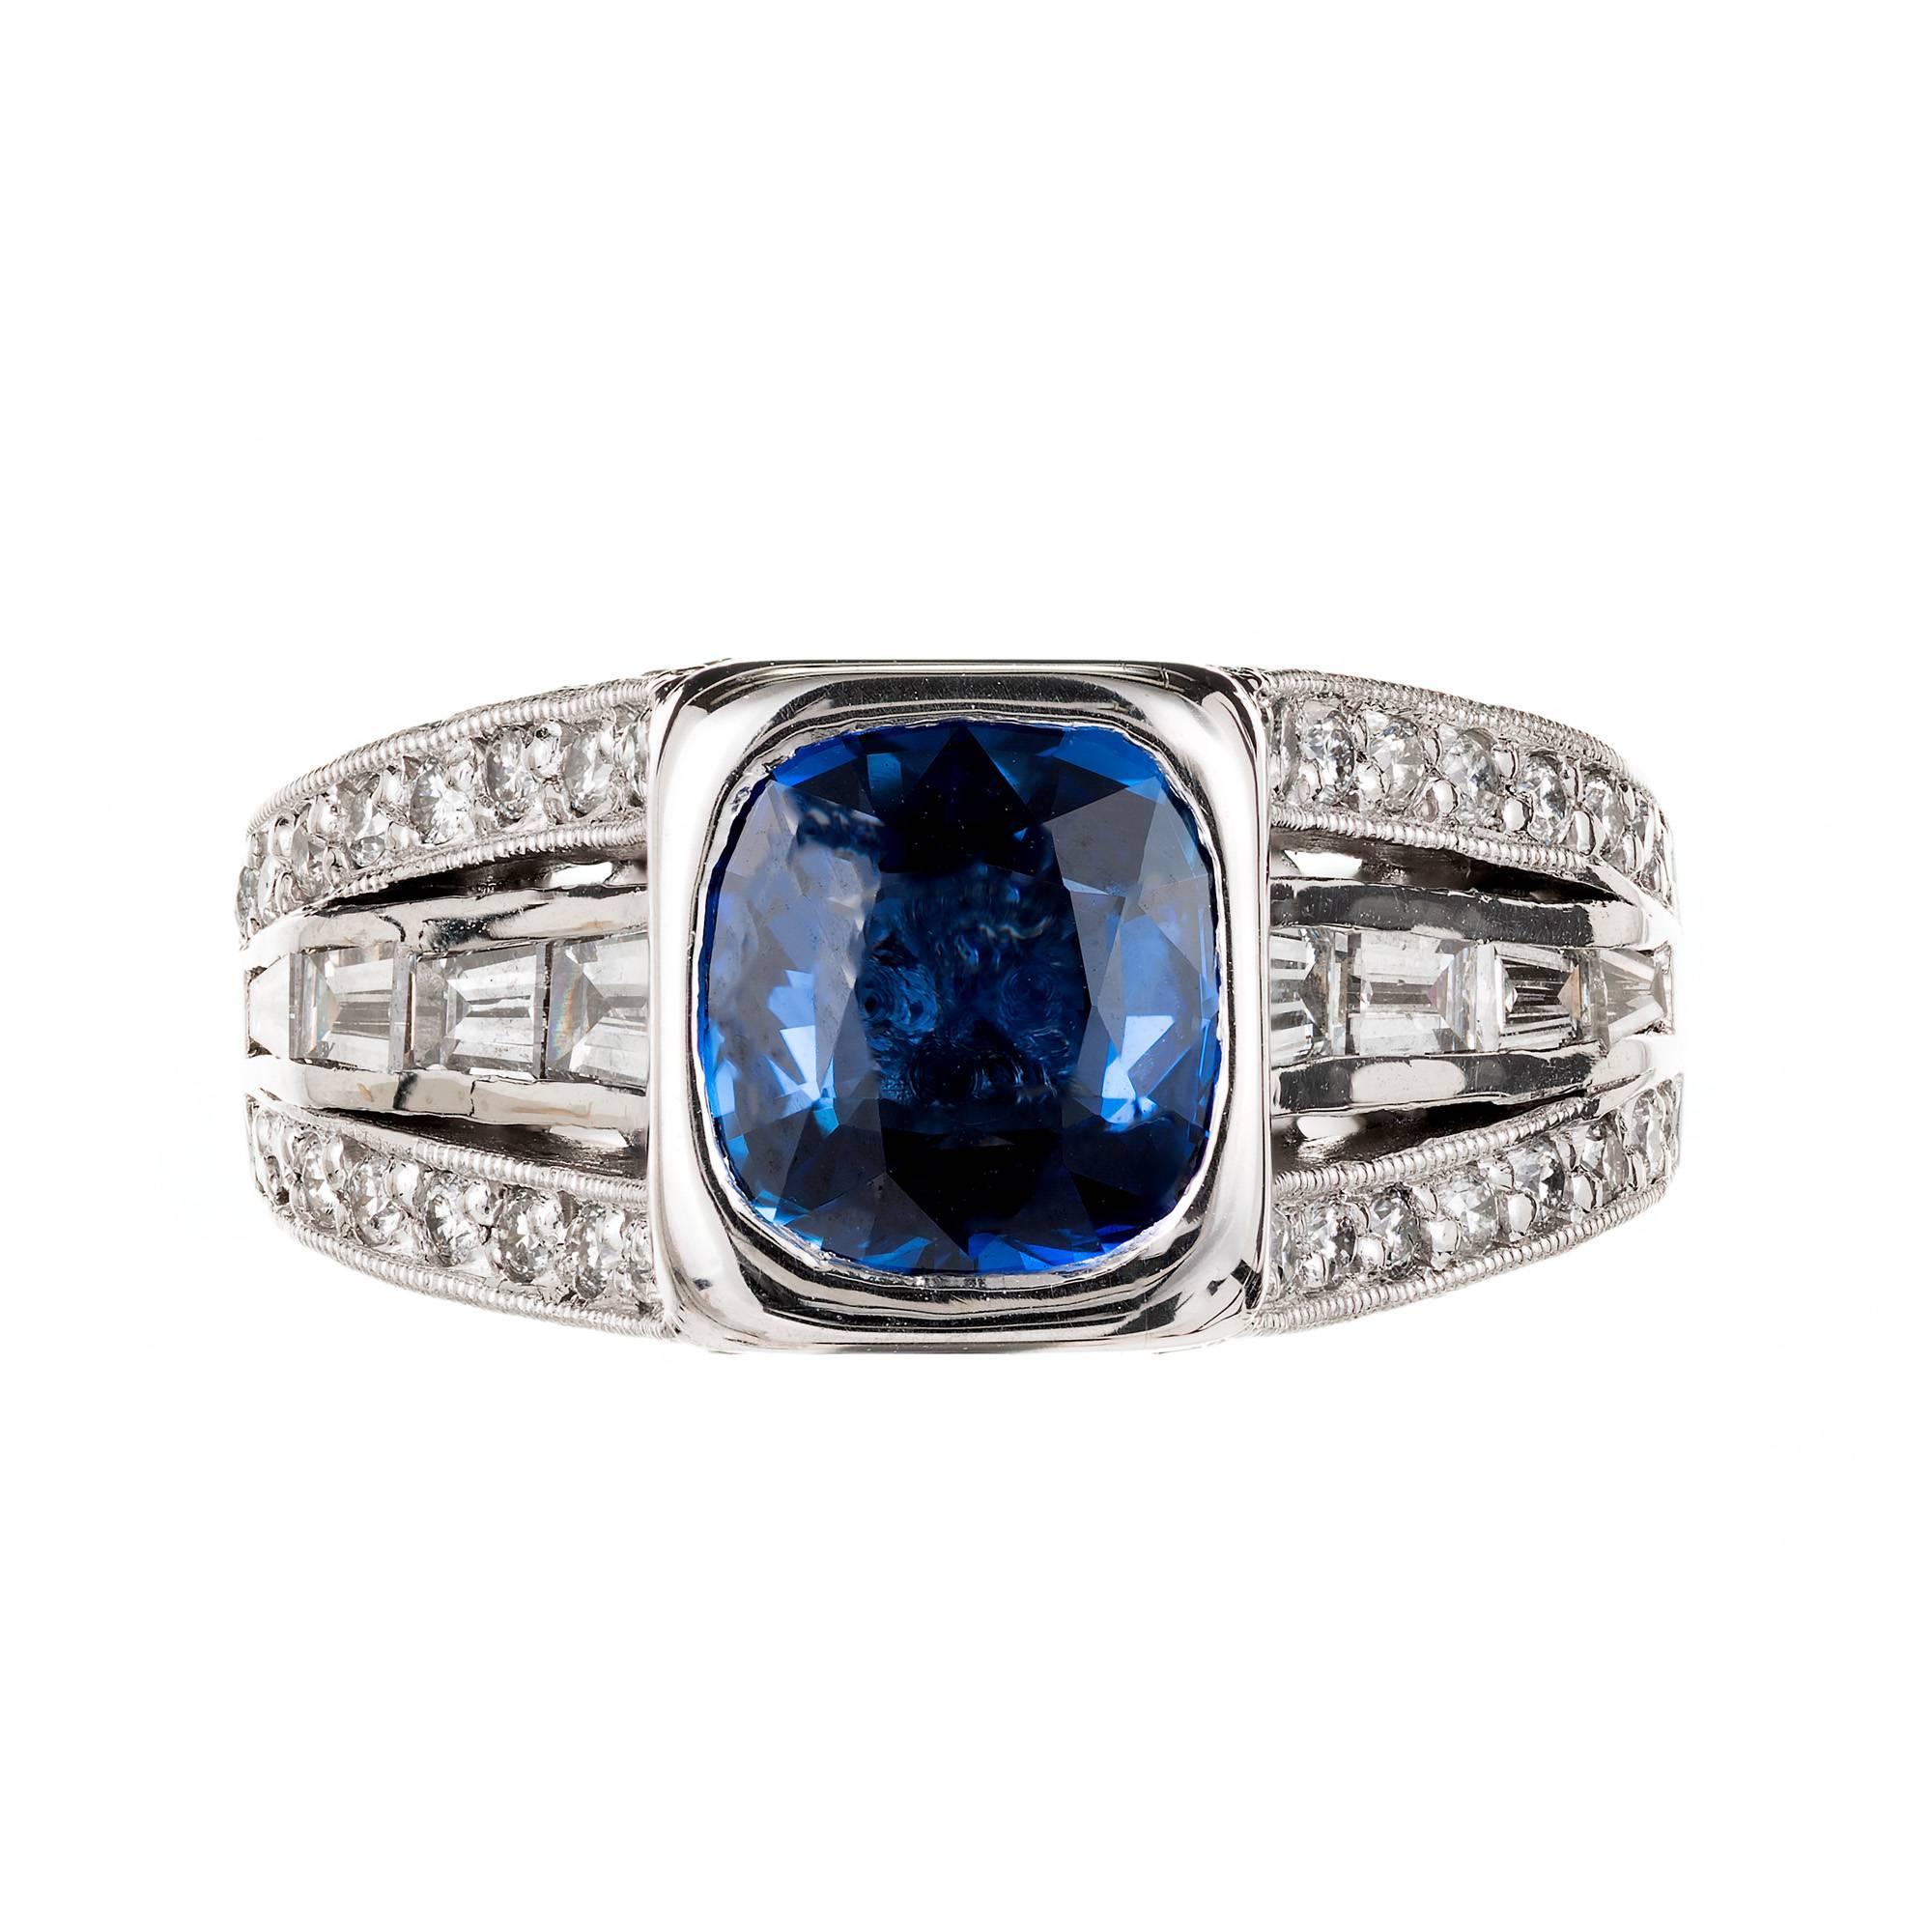 Peter Suchy platinum engagement ring set with a cushion cut bright blue GIA certified natural Sapphire no heat and no enhancements in a 3 row Baguette and round Diamond setting.

1 cushion blue Sapphire, approx. total weight 1.98cts, VS2 – SI1,